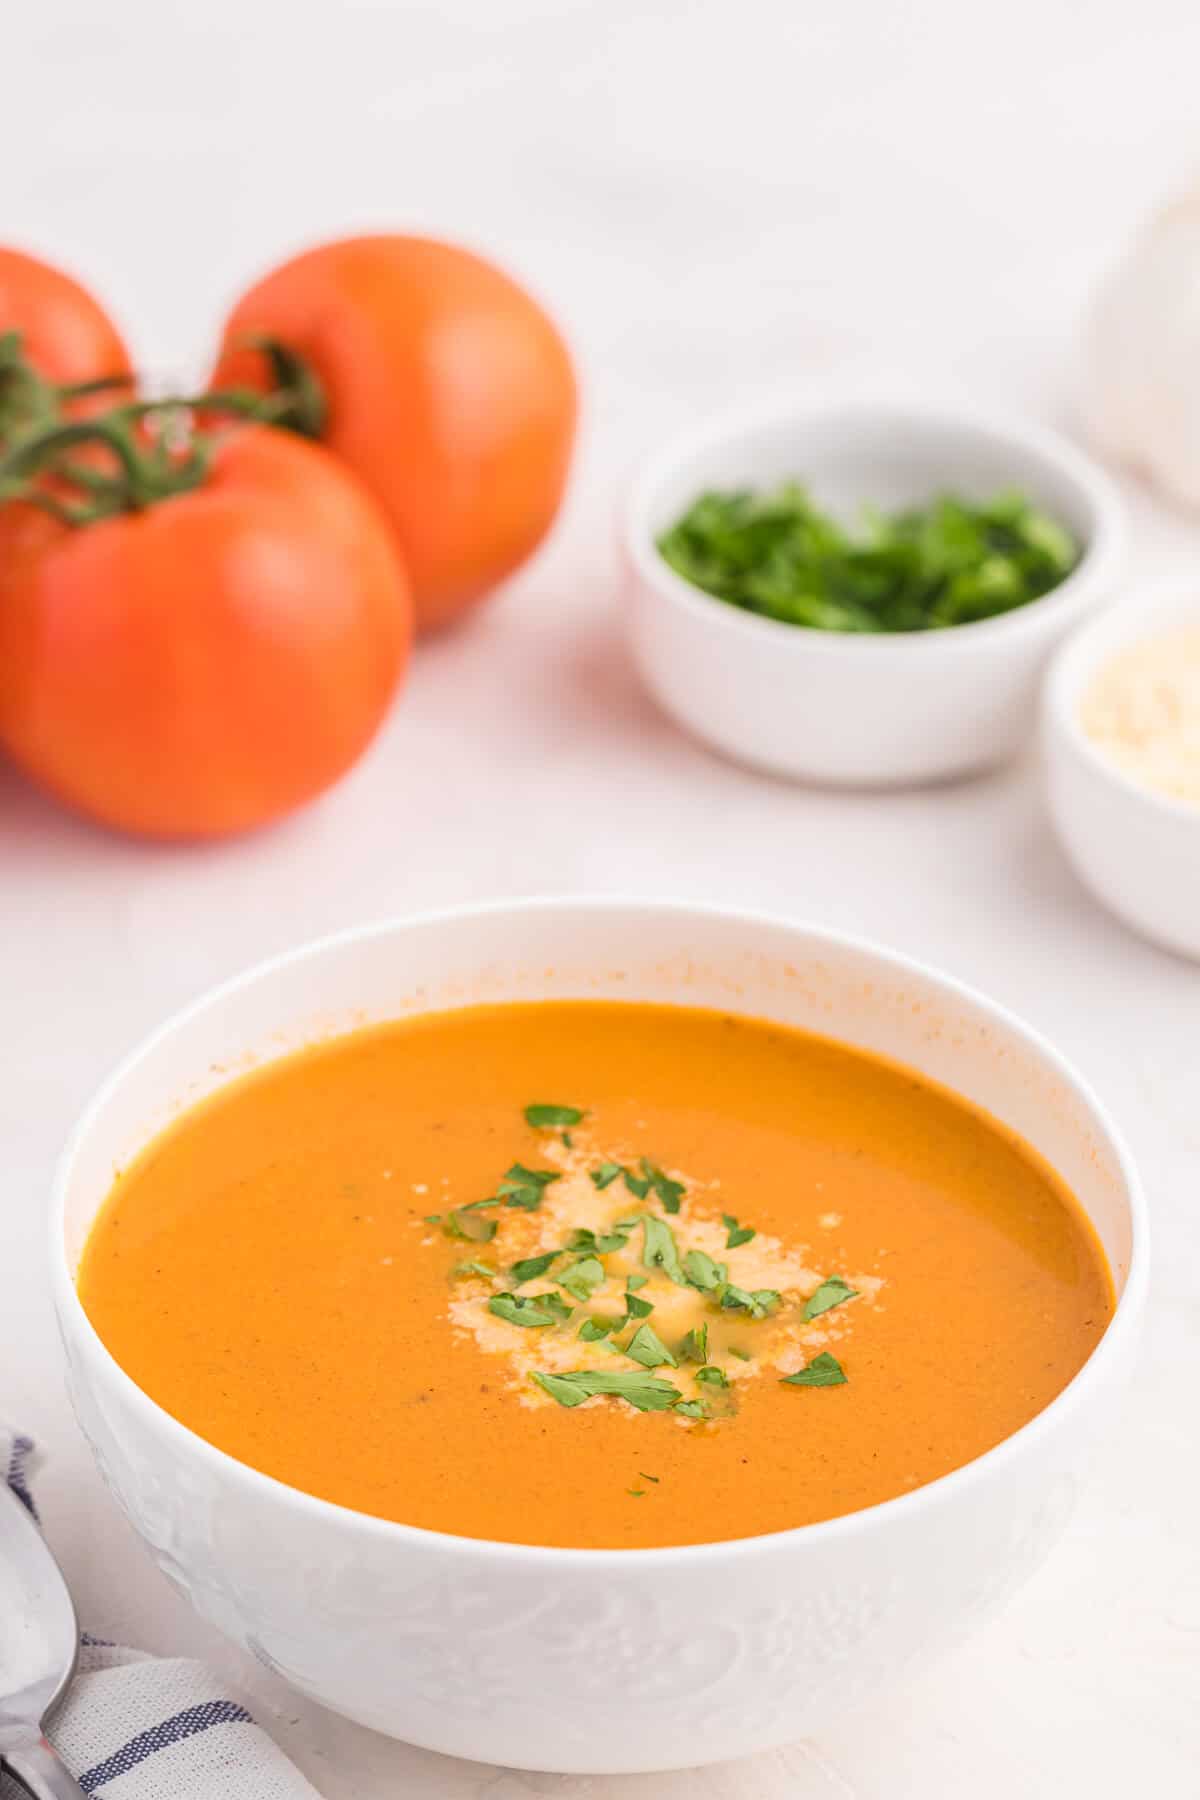 A bowl of roasted garlic and tomato soup.